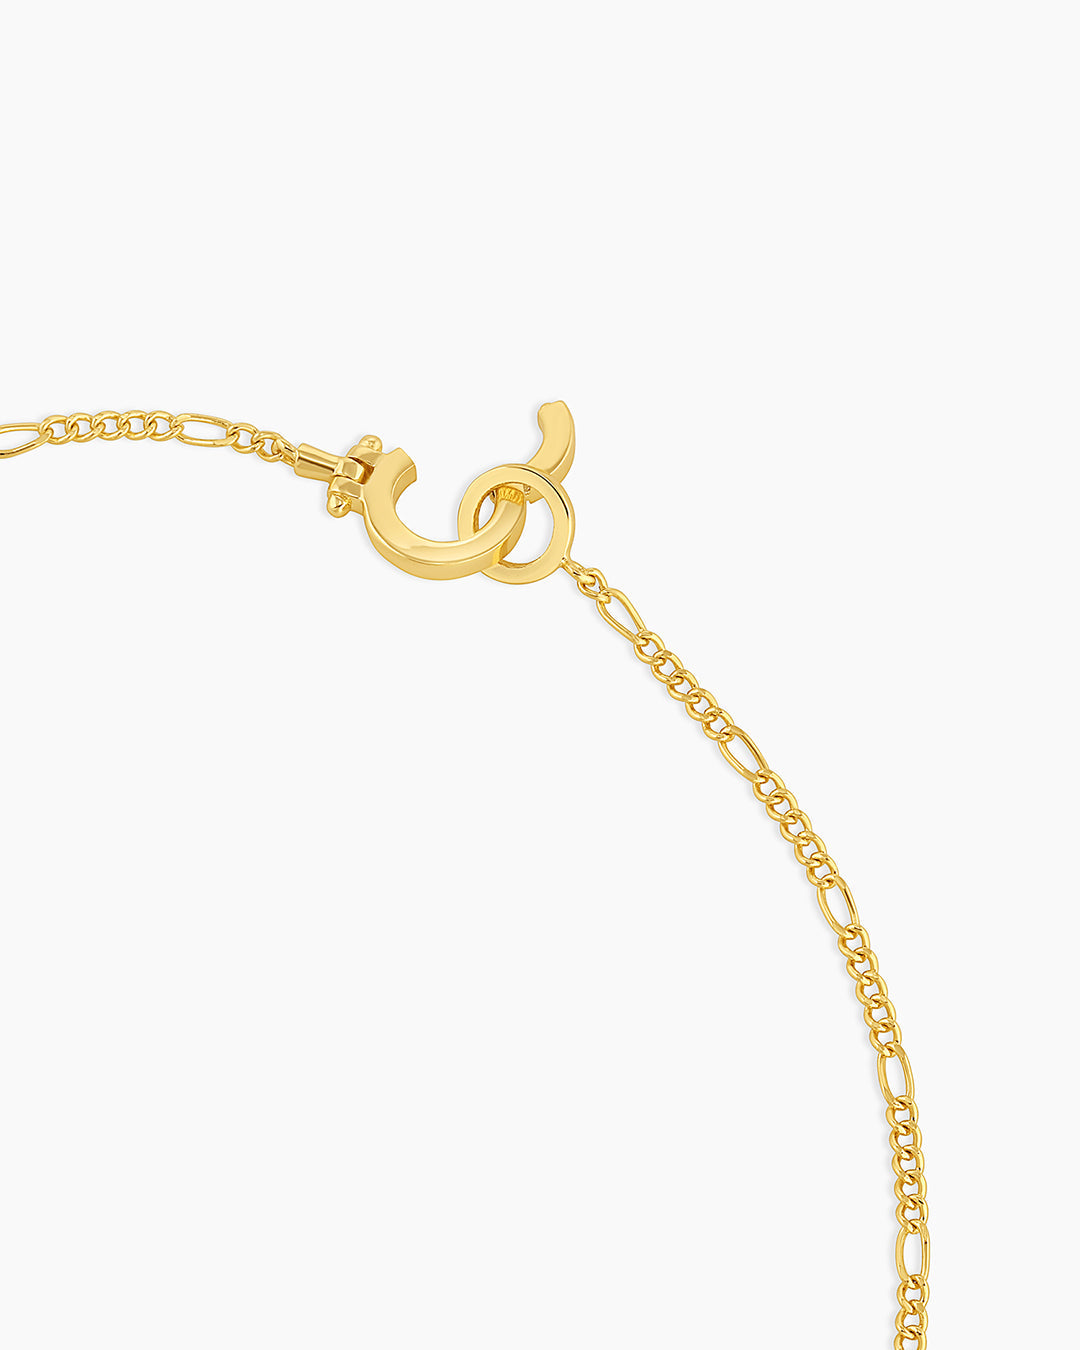 Enzo Chain Necklace || option::Gold Plated